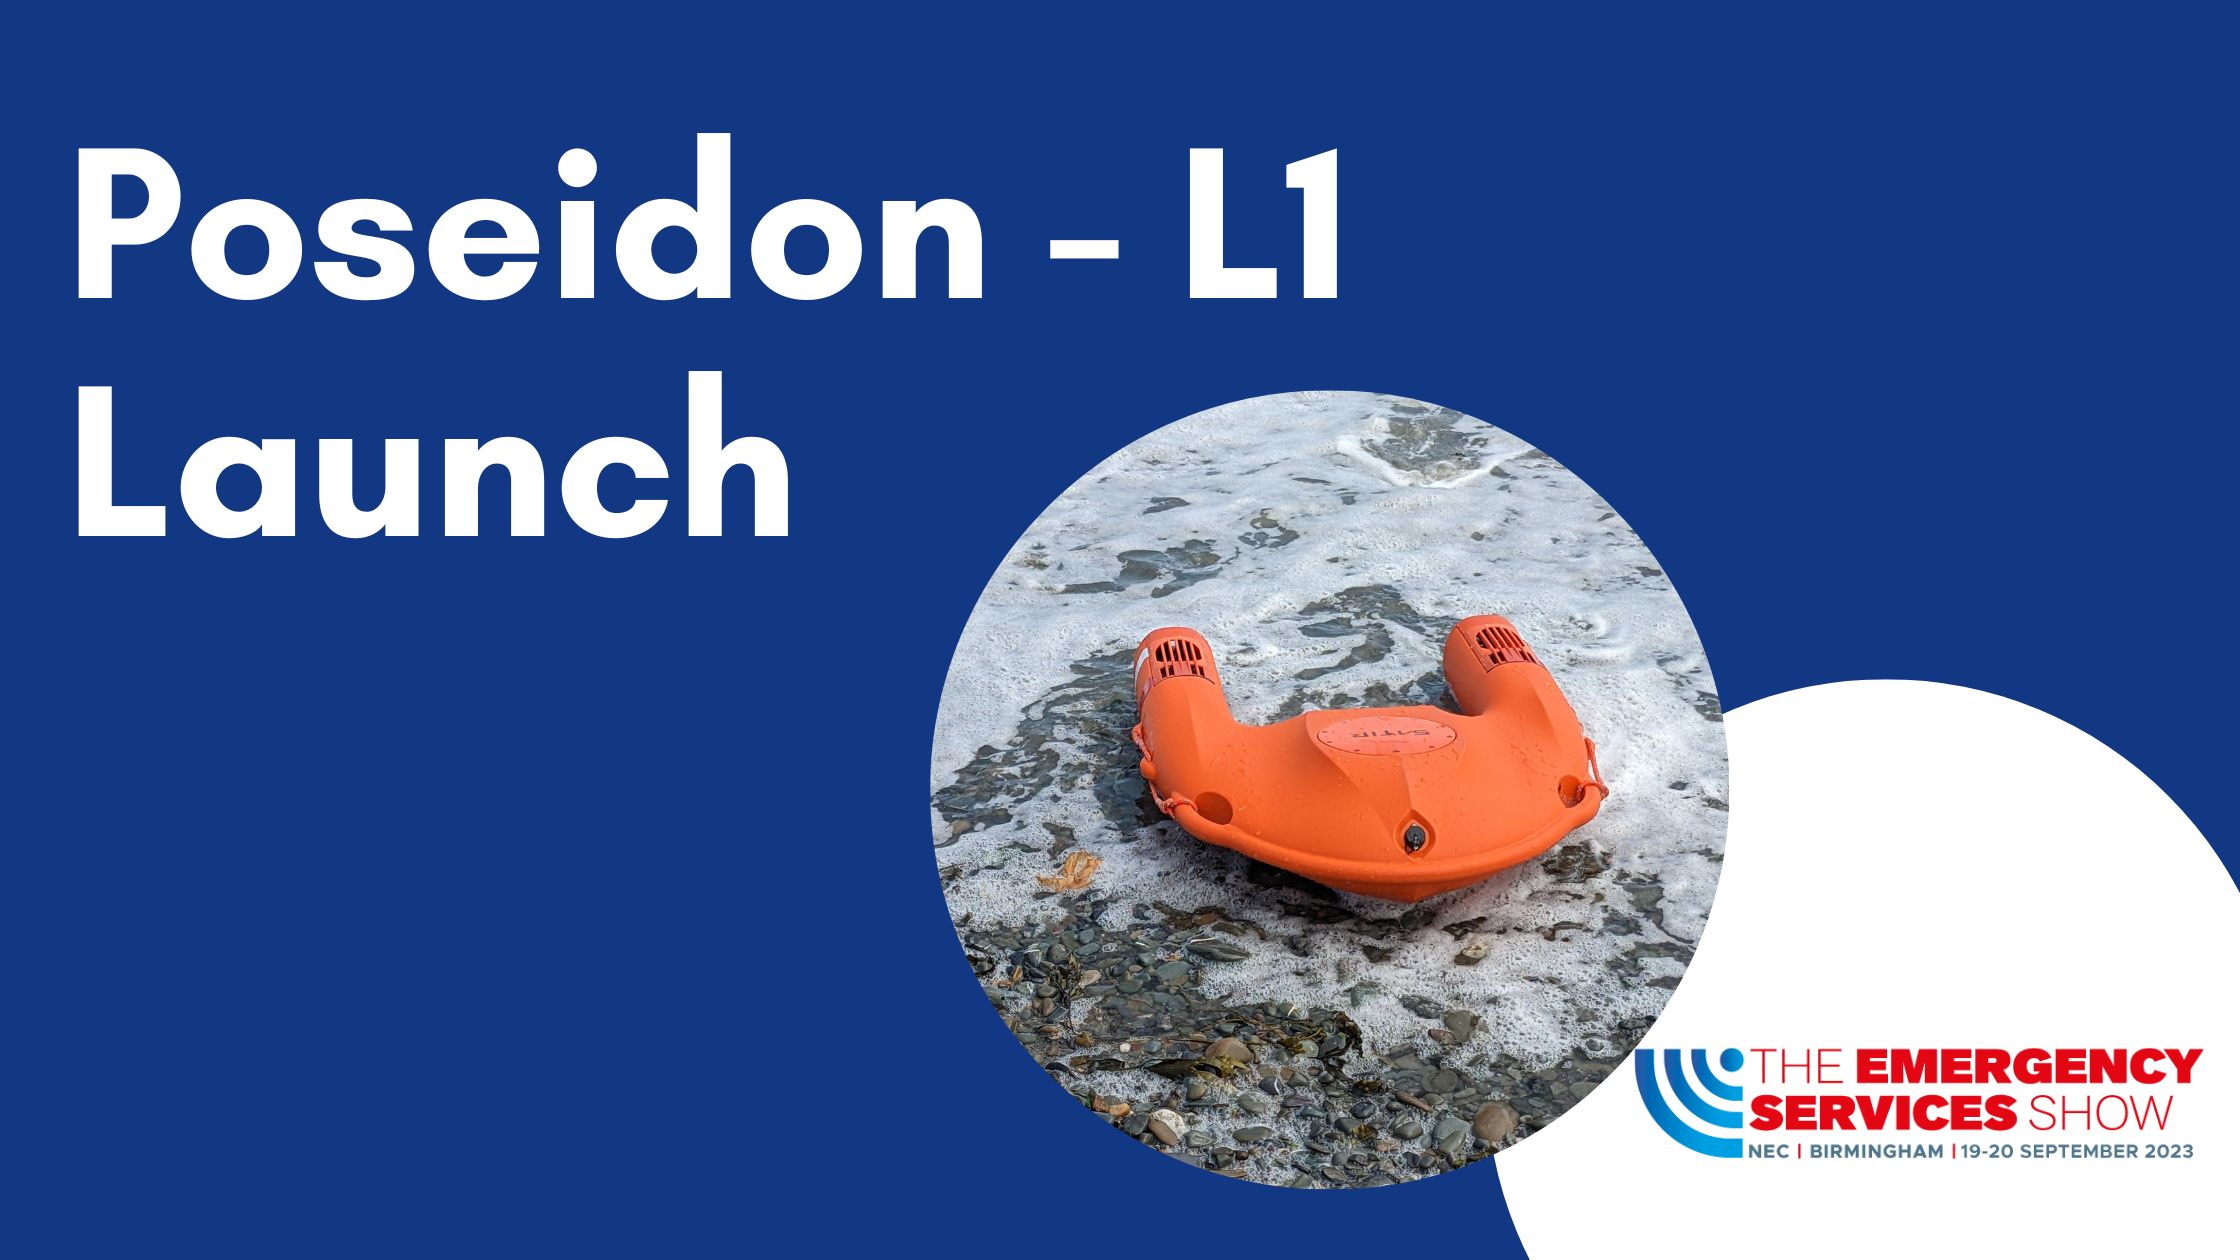 Poseidon - L1 Launch at Emergency Services Show